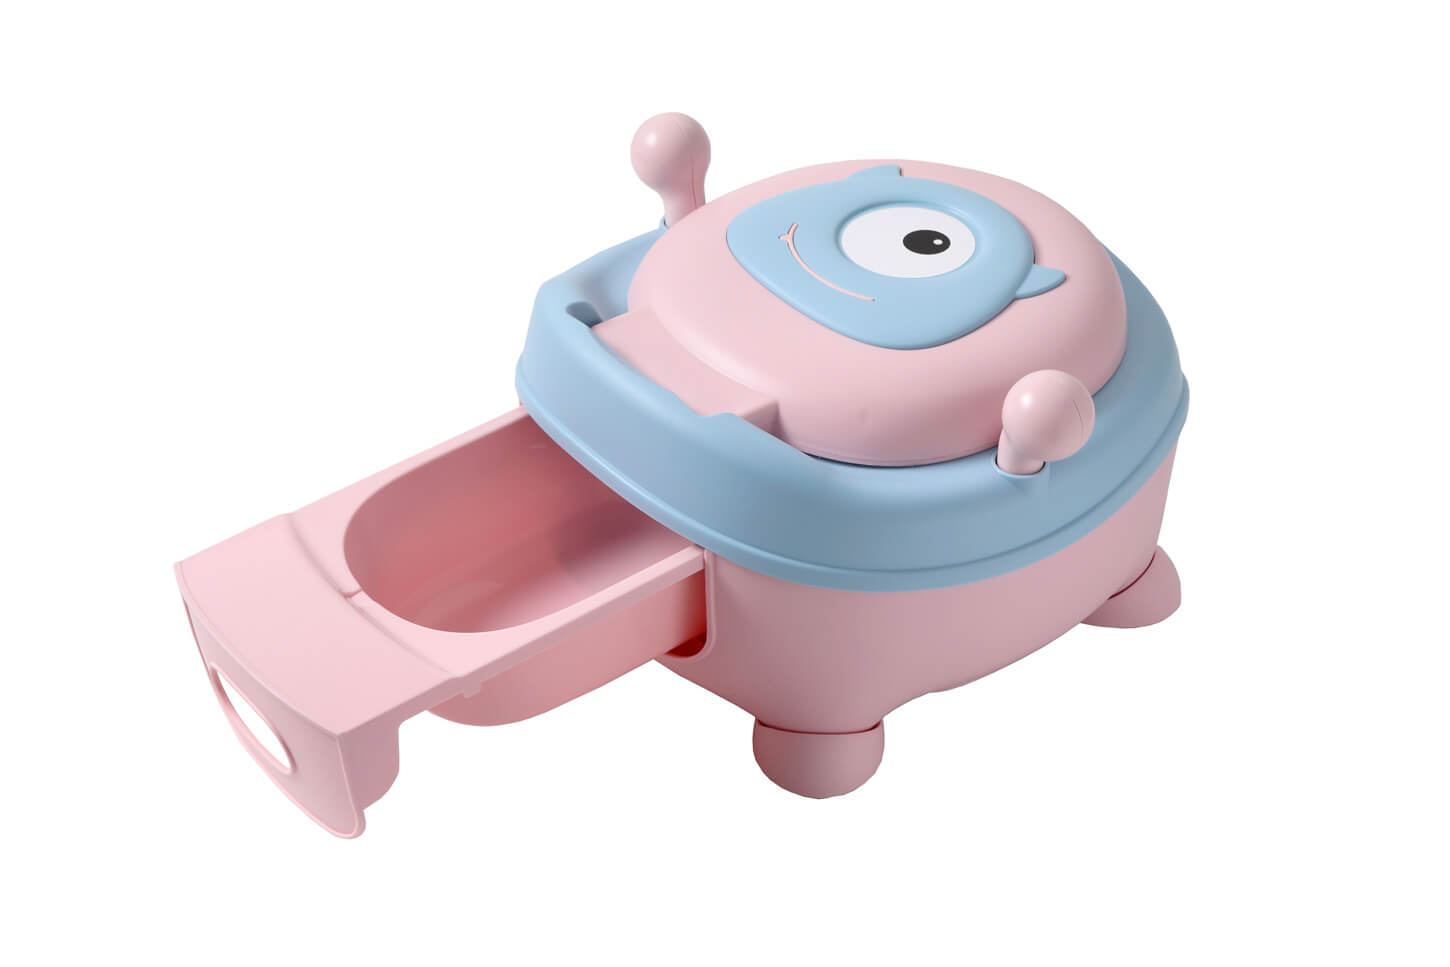 Advantages of Babyhood's Monster Potty